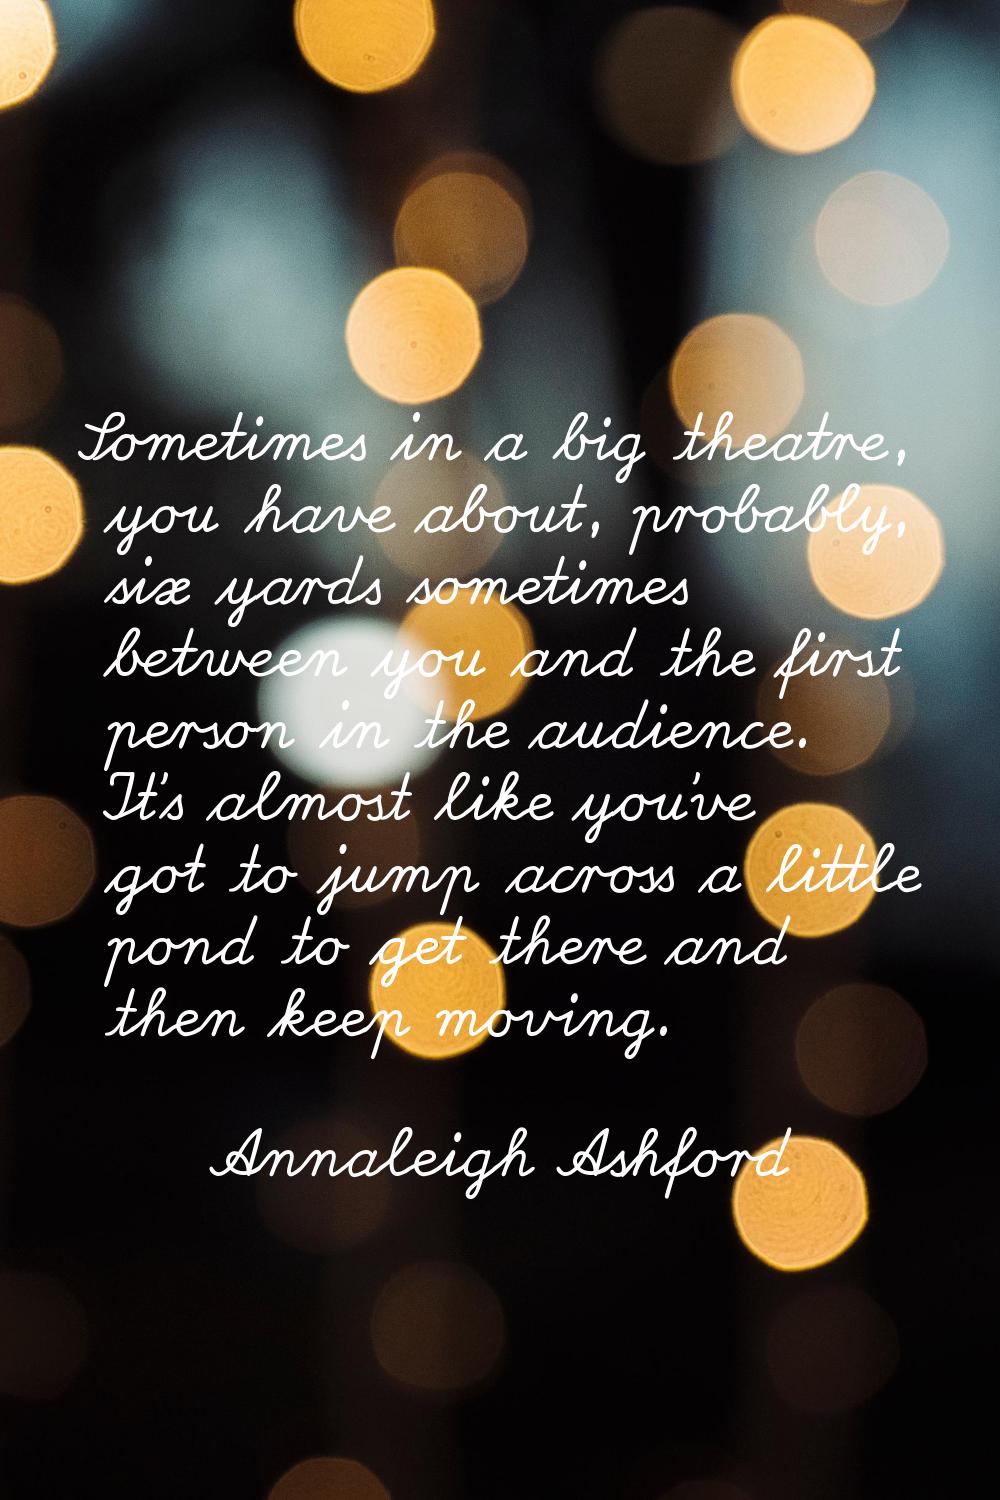 Sometimes in a big theatre, you have about, probably, six yards sometimes between you and the first